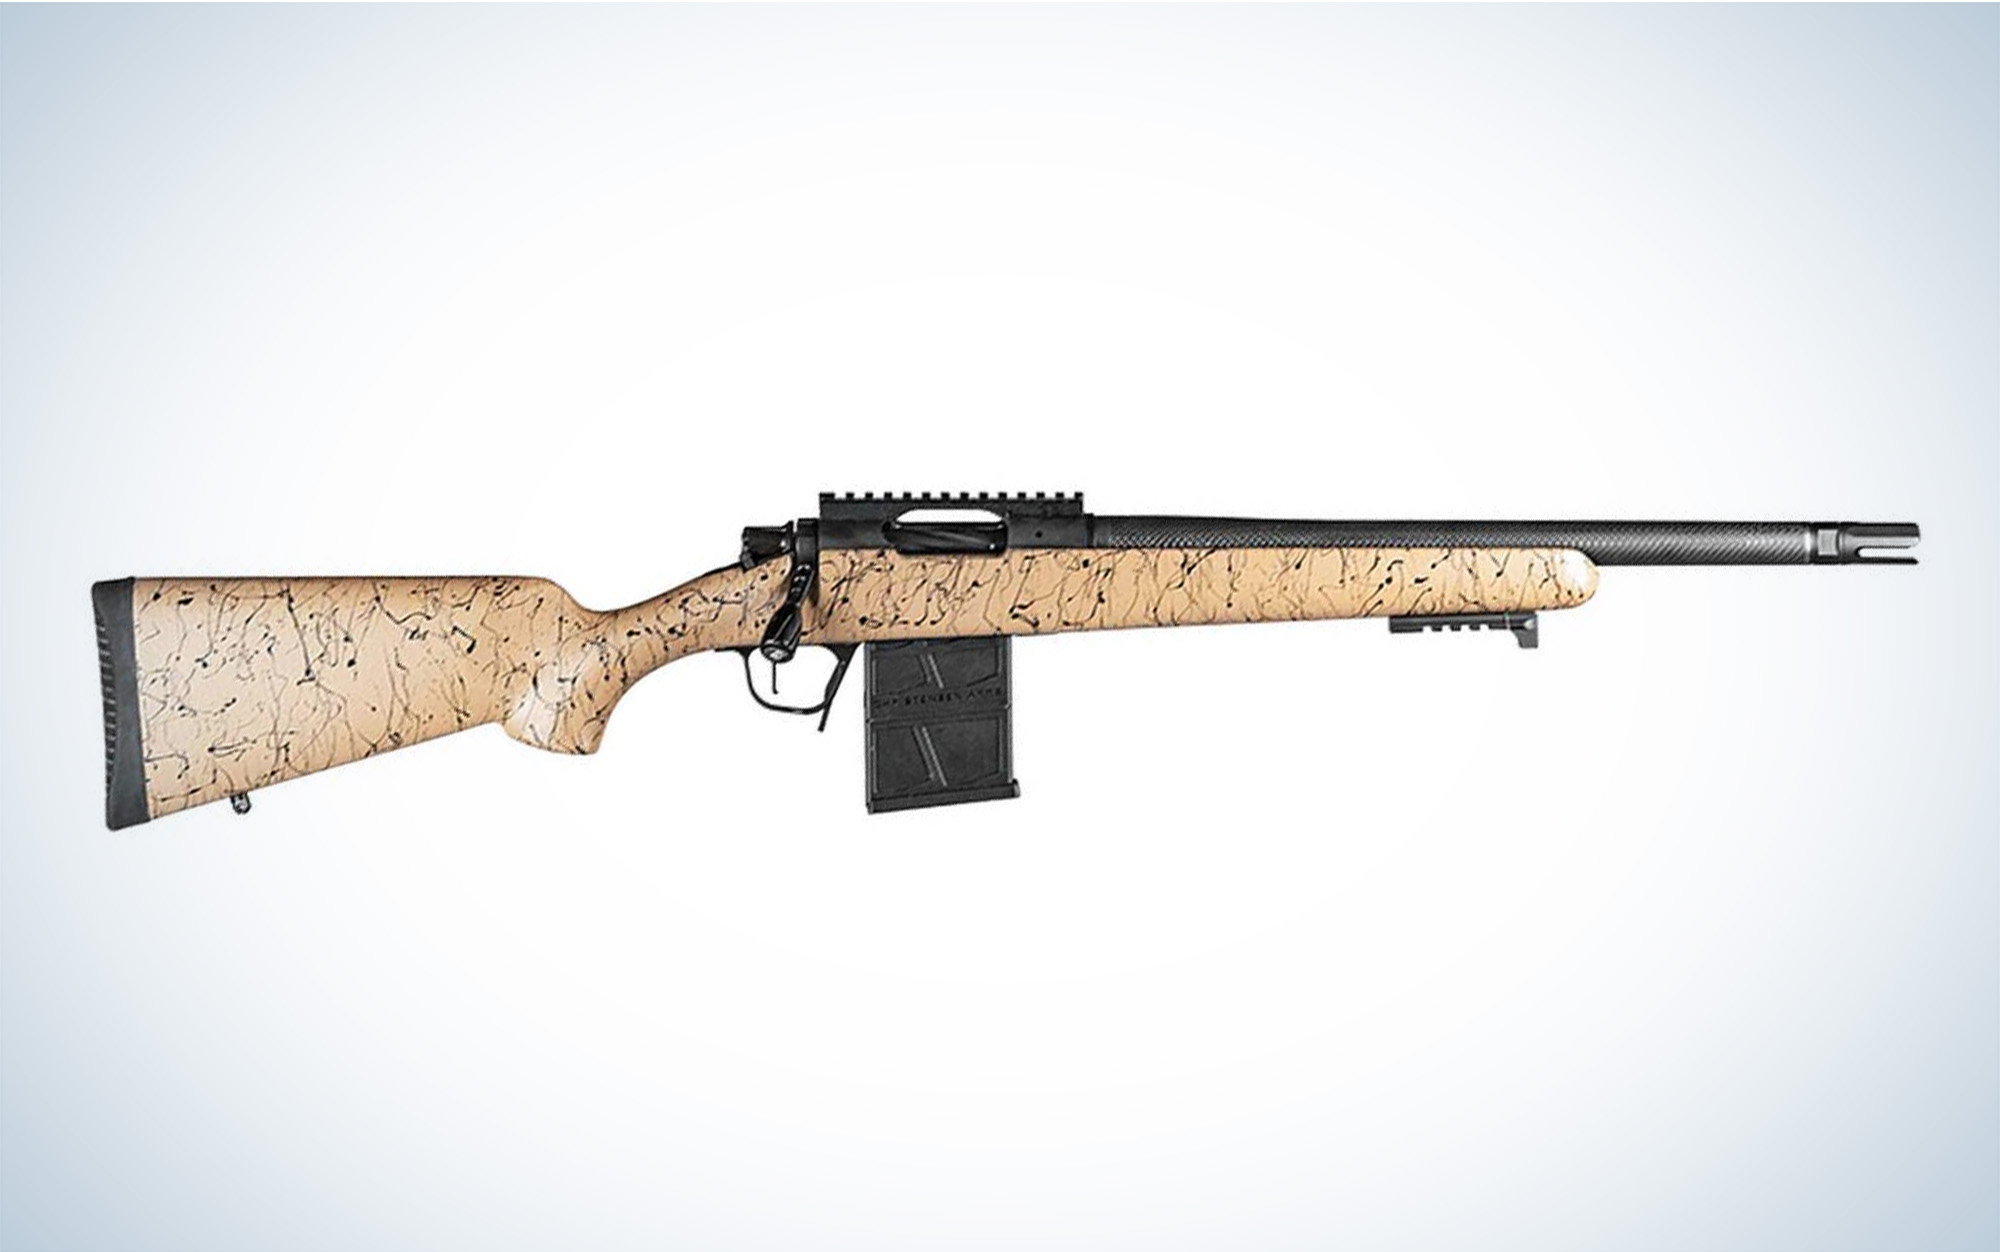 The Ridgeline Scout is an accurate and versatile rifle